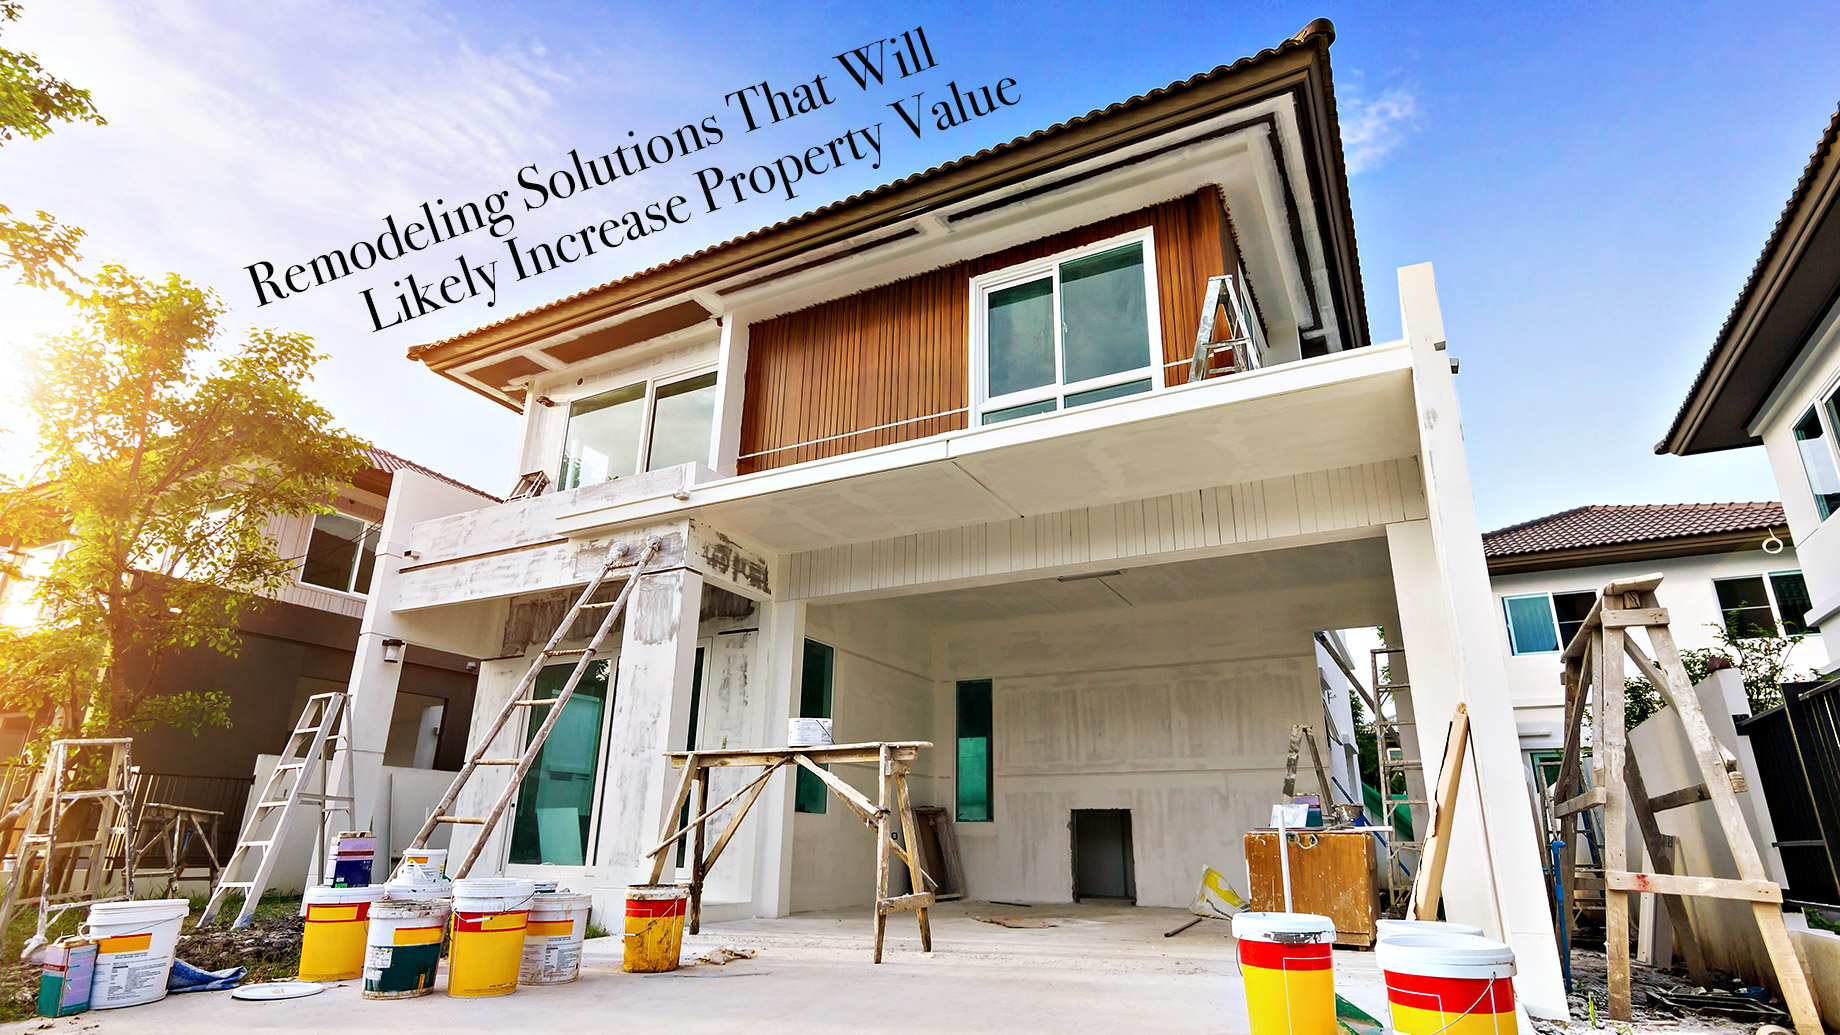 Remodeling Solutions That Will Likely Increase Property Value